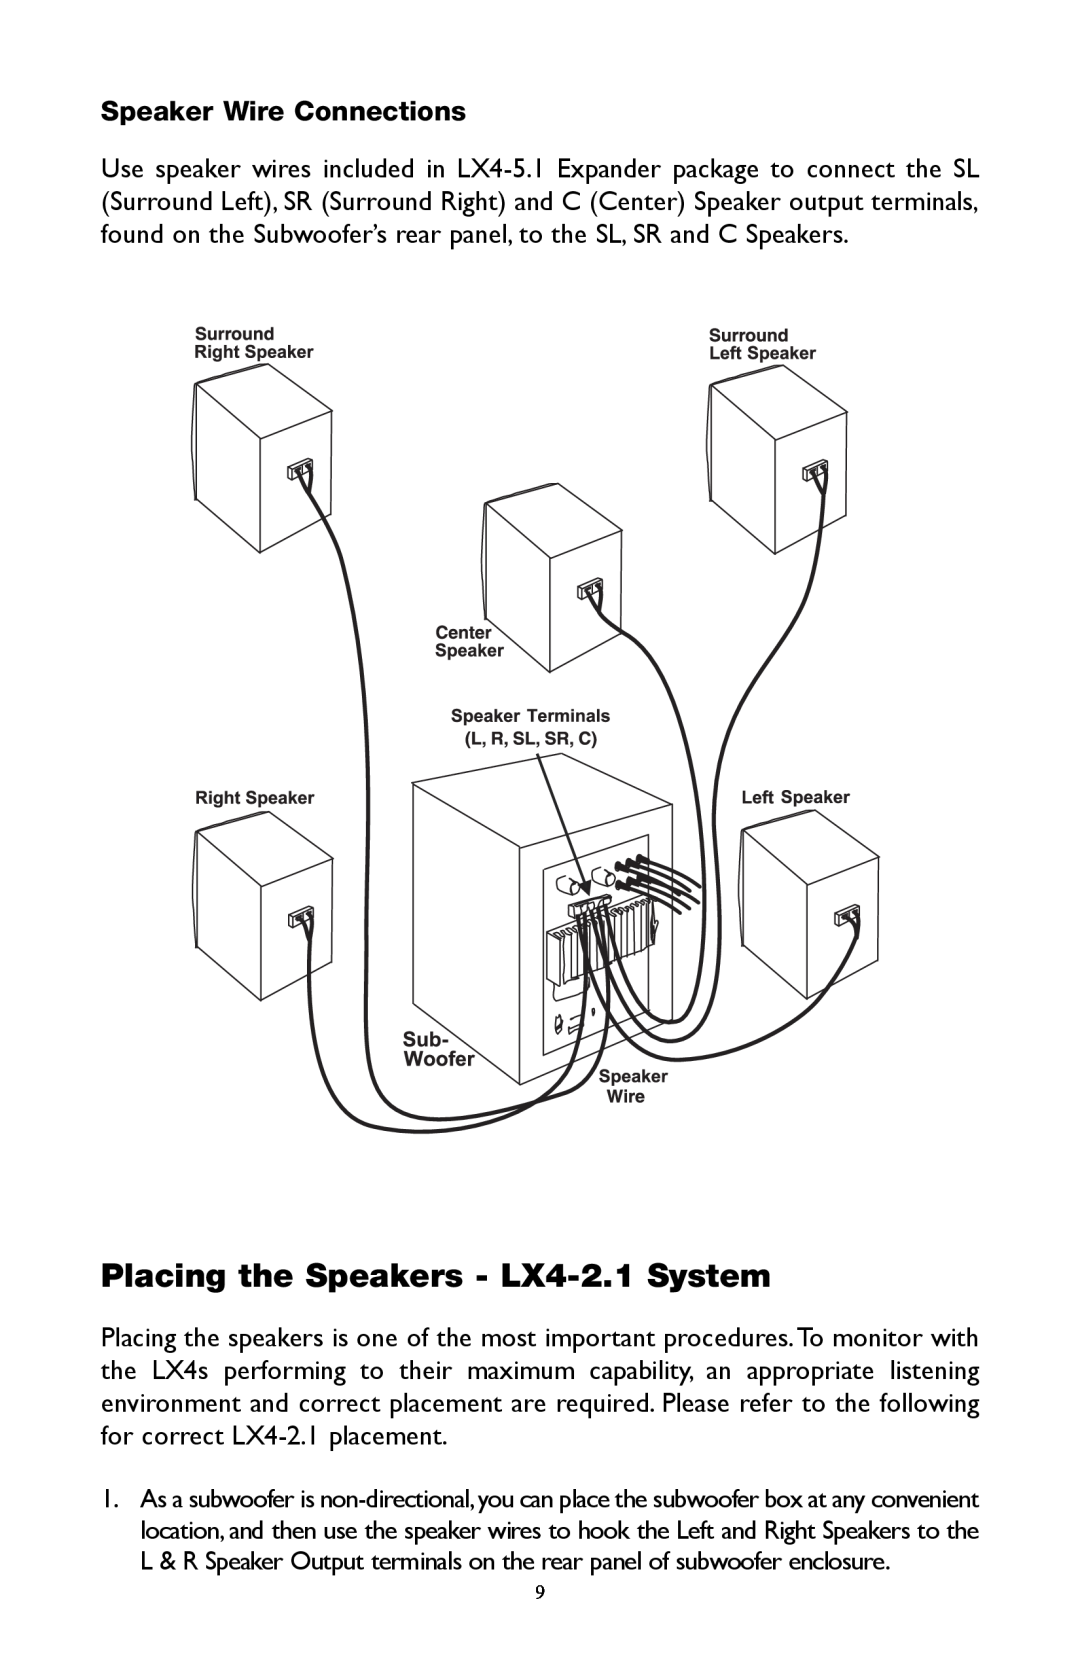 M-Audio warranty Placing the Speakers - LX4-2.1System, Speaker Wire Connections 